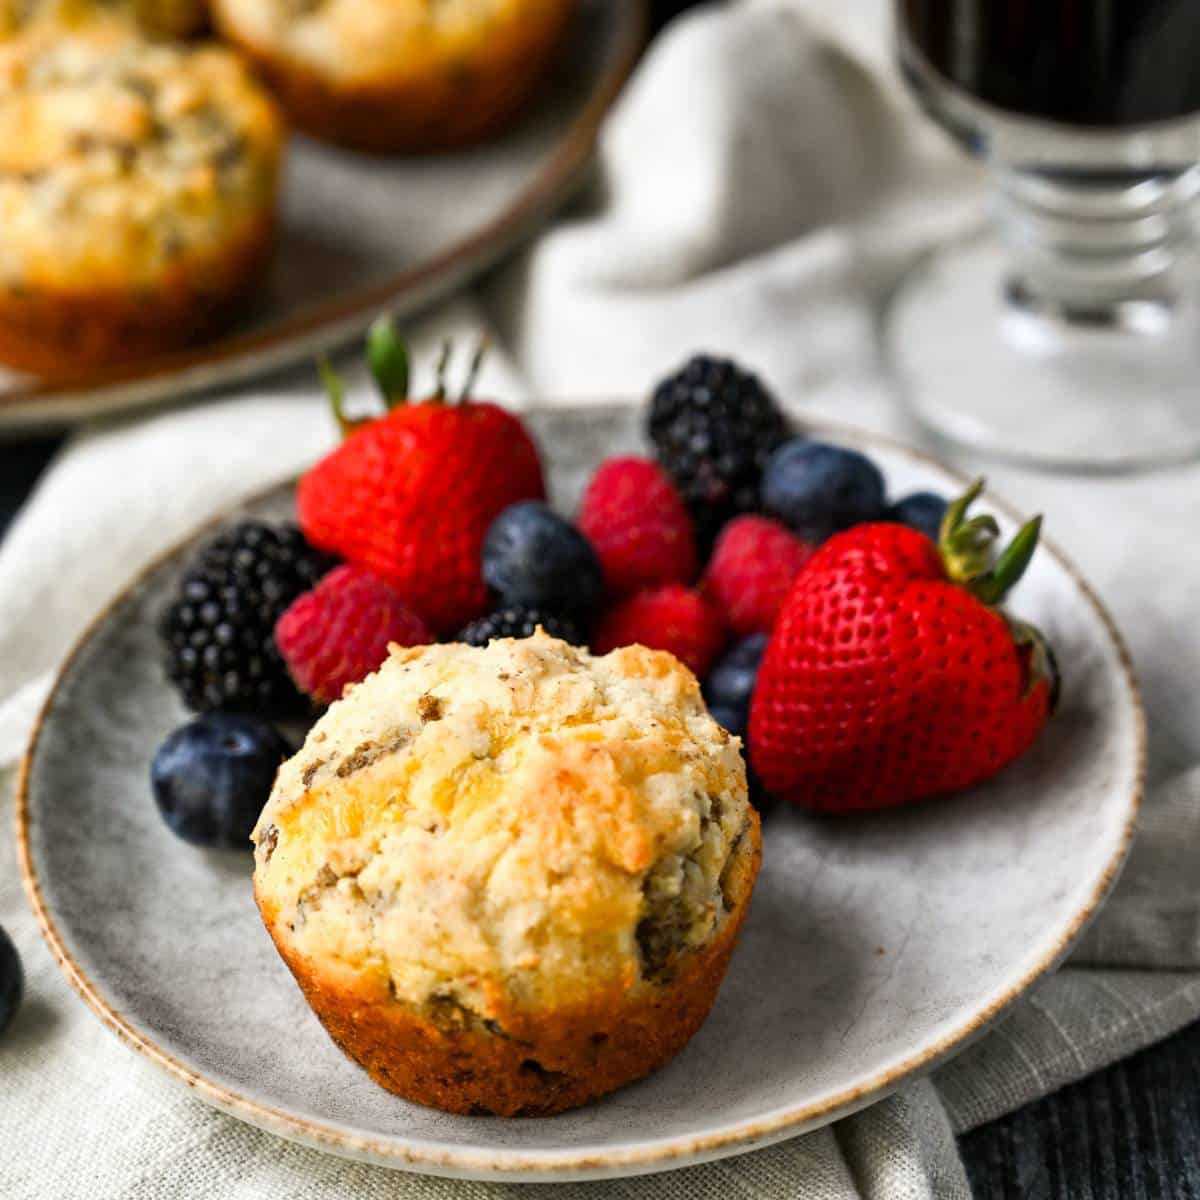 a sausage and cheese muffin on a gray plate with strawberries, blueberries, and raspberries